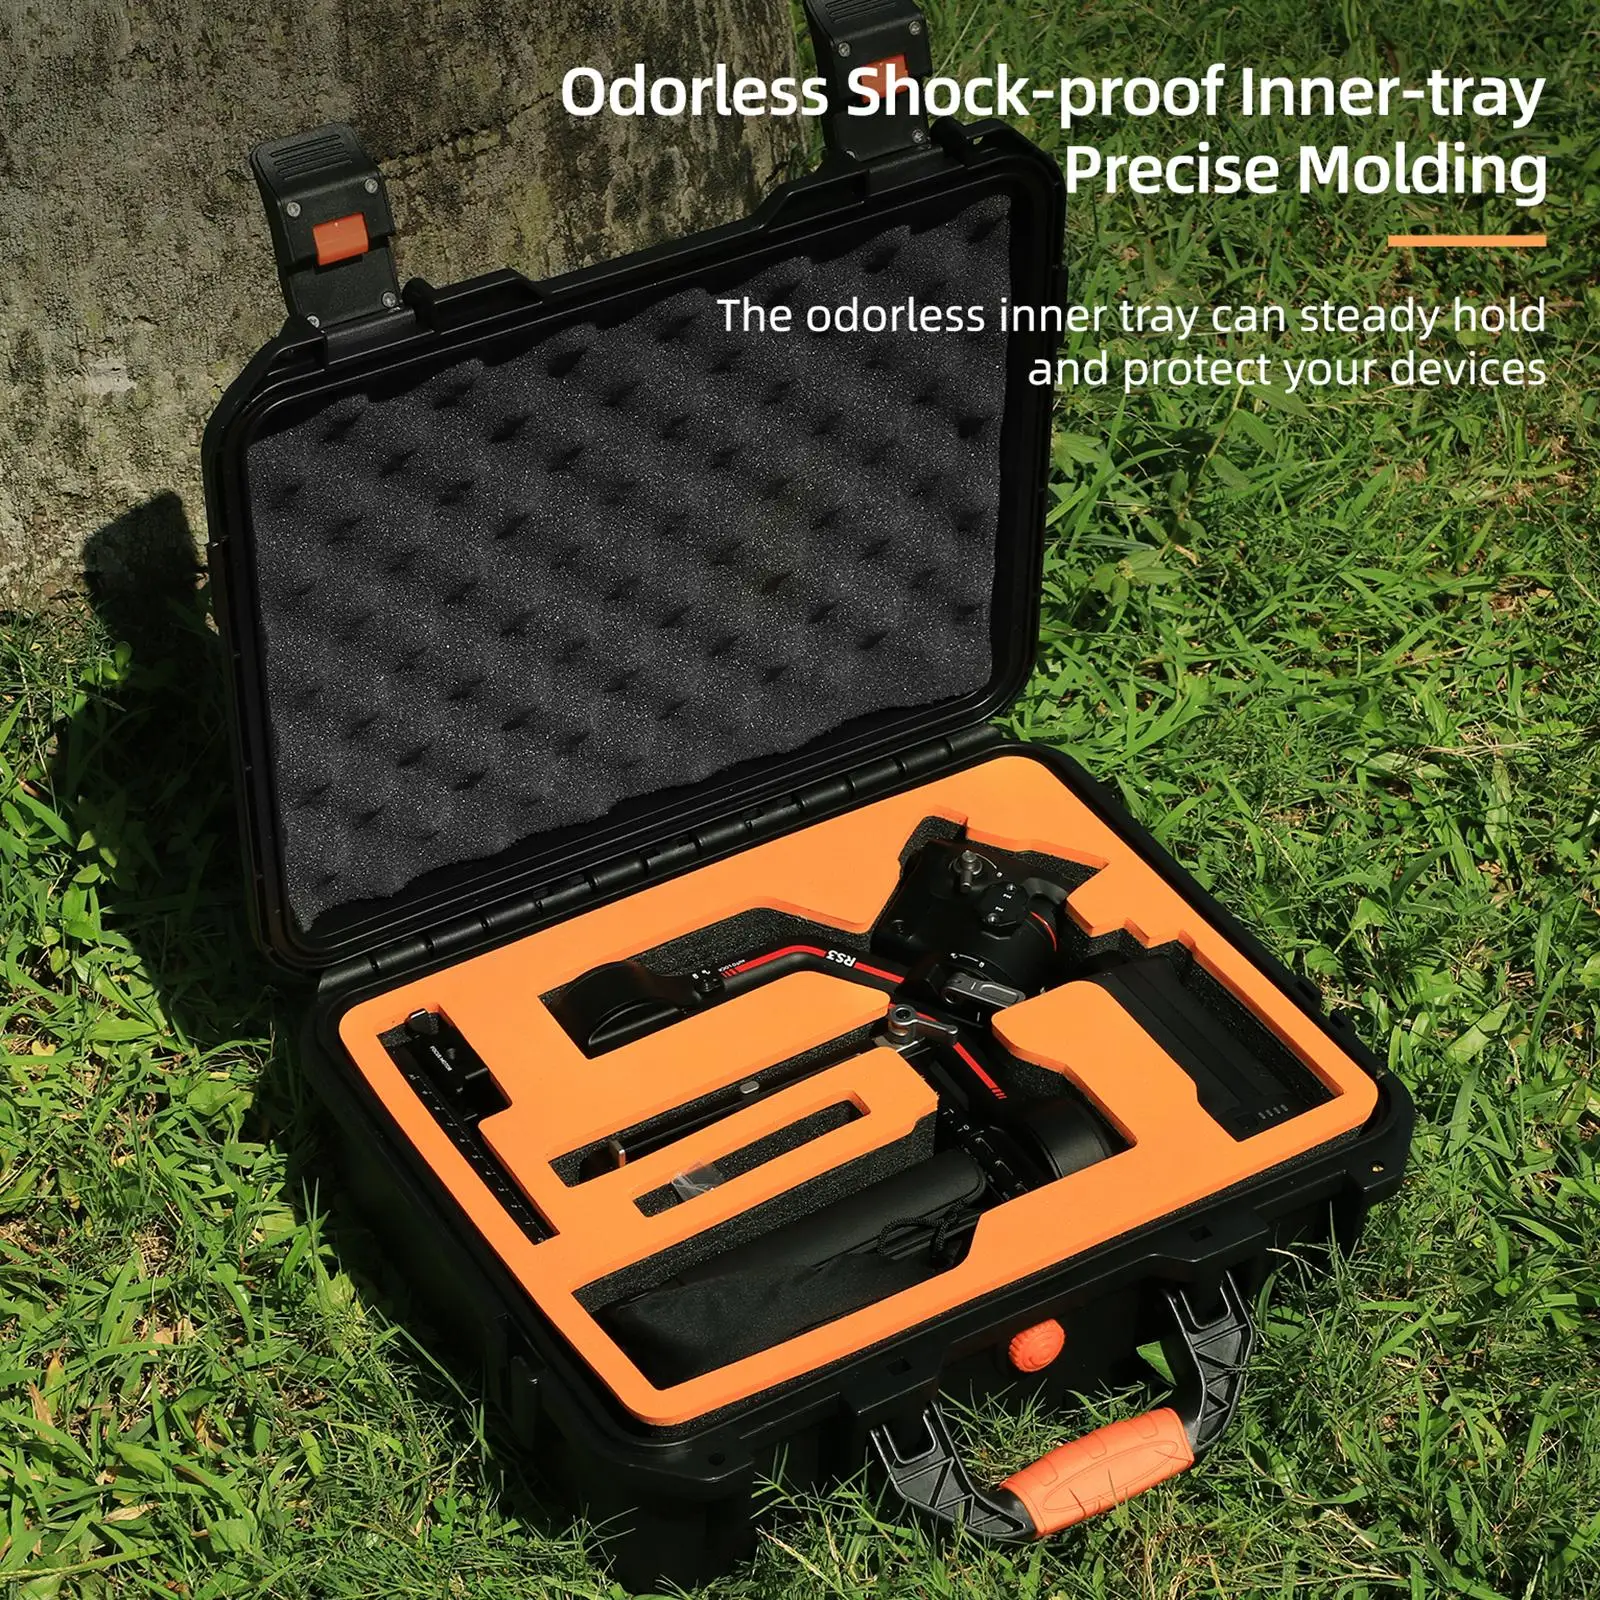 Shockproof Hard Storage Case Waterproof Hard Case Carrying Case for Gimbal Stabilizer Accessories